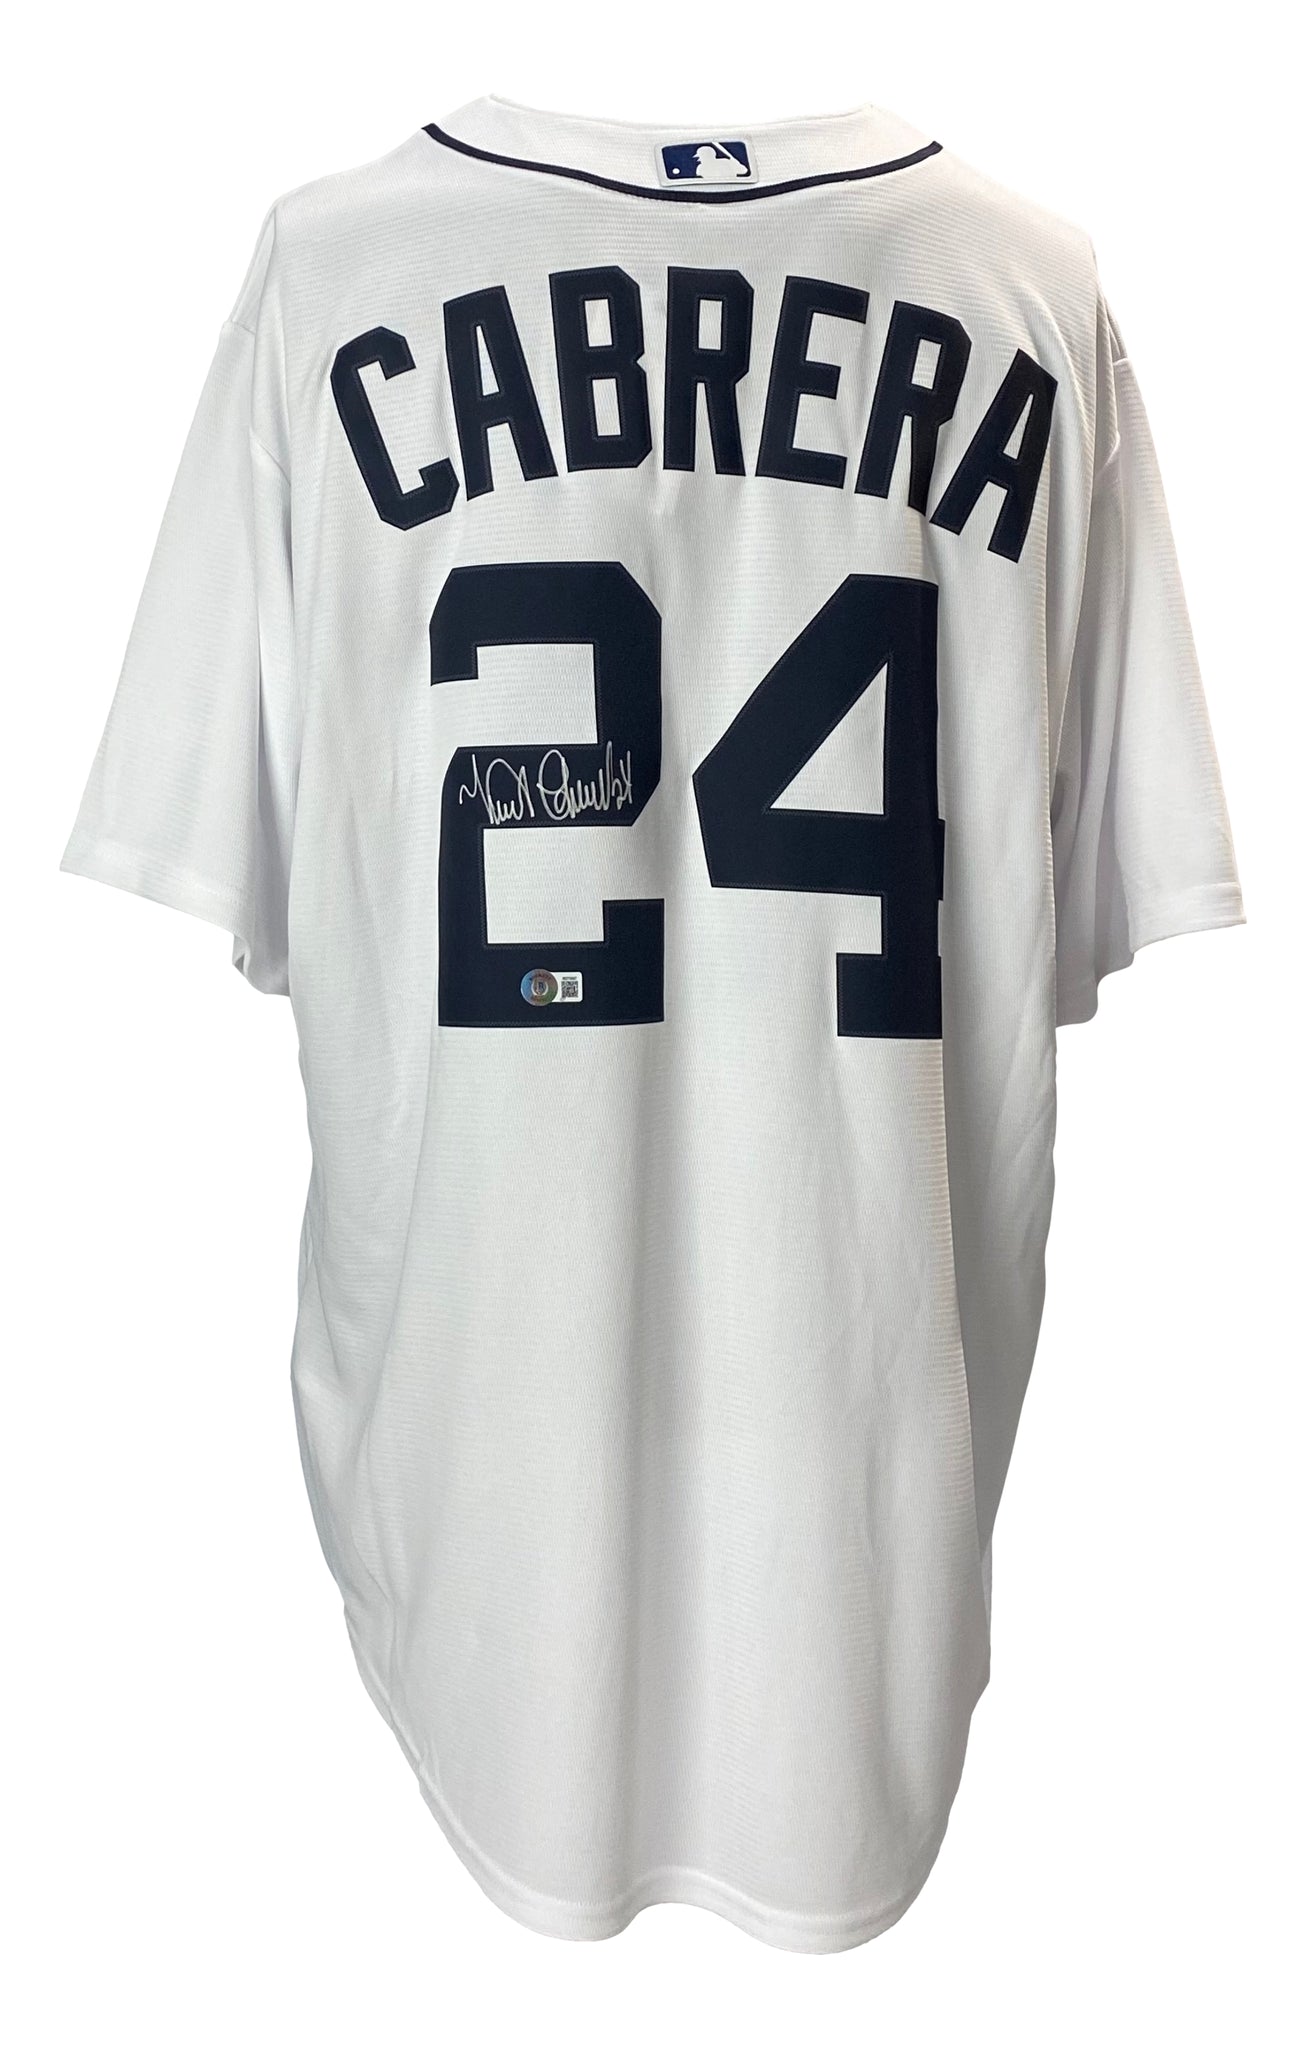 Sports Integrity Miguel Cabrera Signed Detroit Tigers White Nike Baseball Jersey BAS Itp